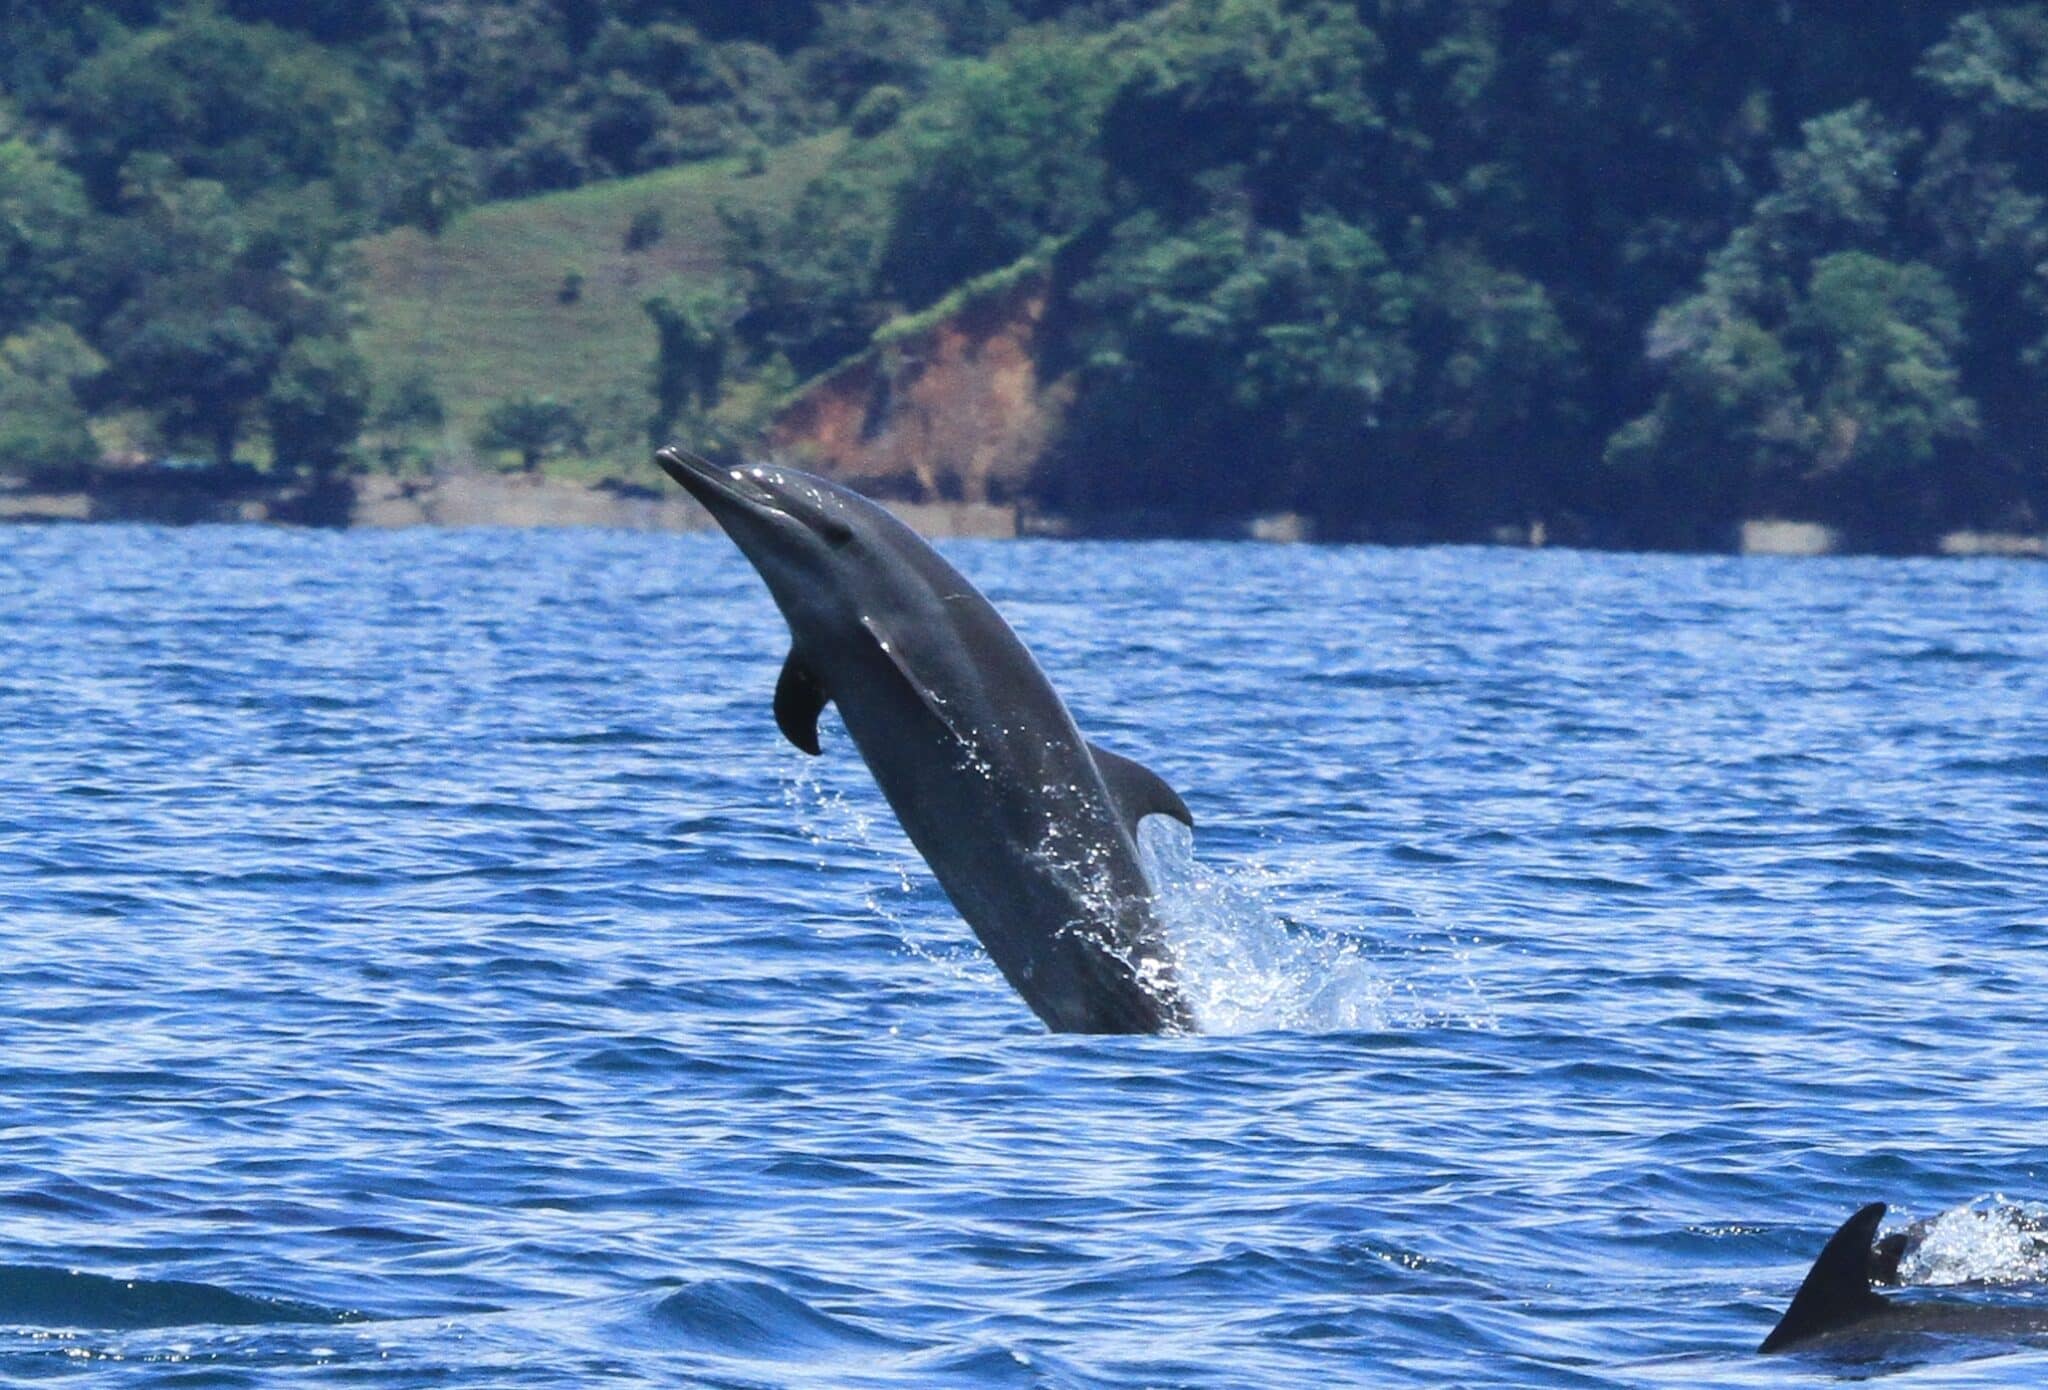 Dolphin jumping (Credit: CEIC)